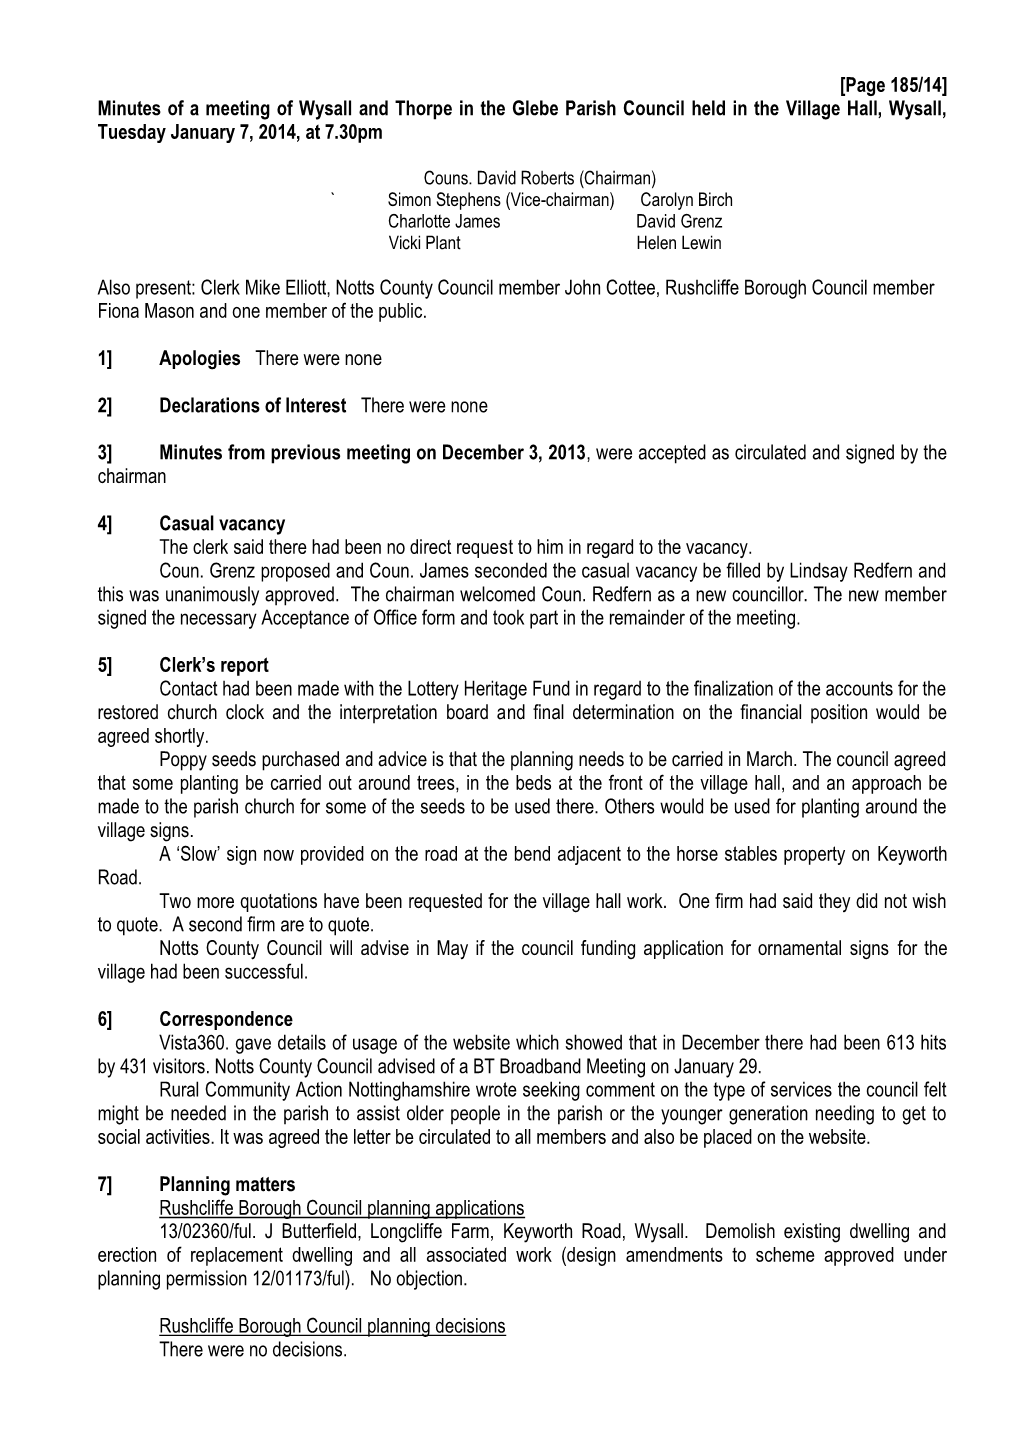 Minutes of a Meeting of Wysall and Thorpe in the Glebe Parish Council Held in the Village Hall, Wysall, Tuesday January 7, 2014, at 7.30Pm